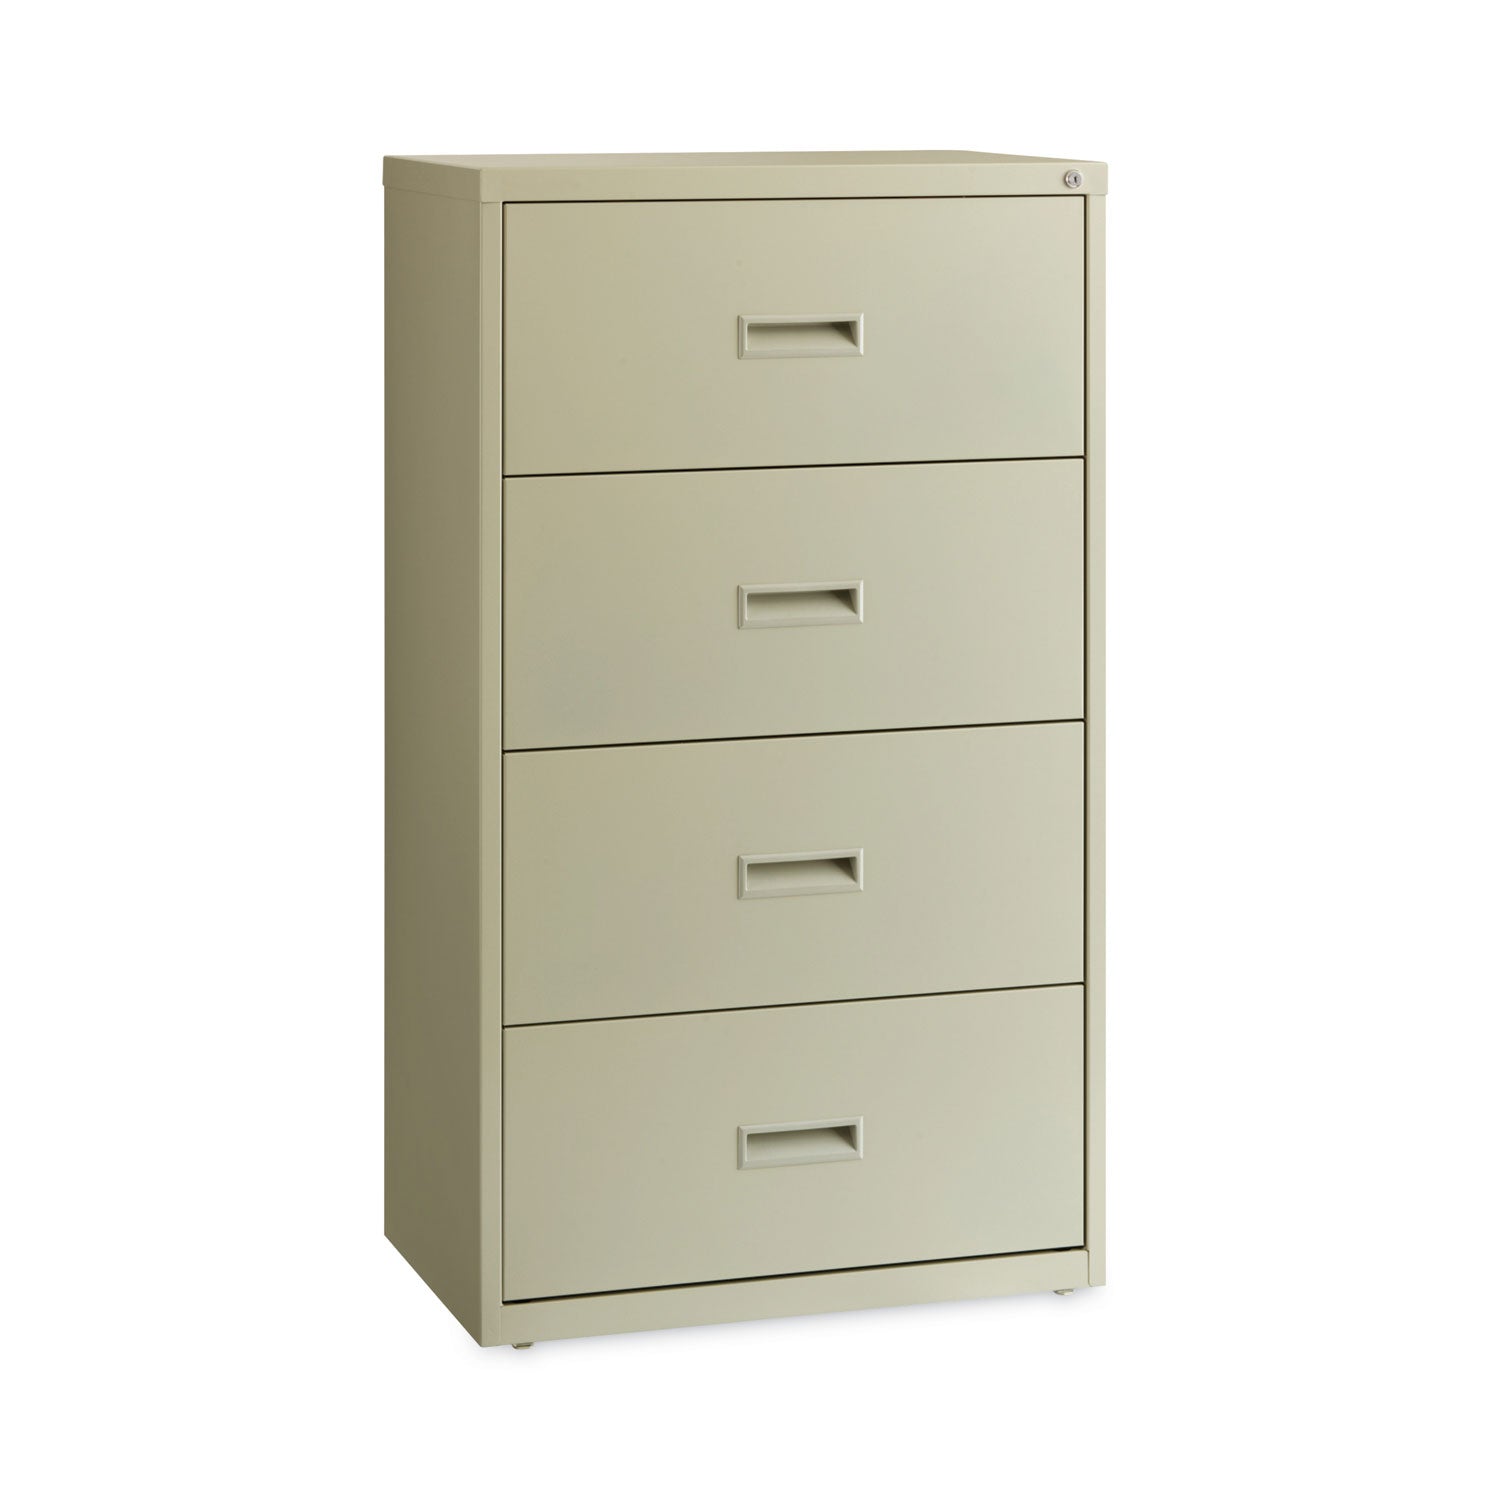 lateral-file-cabinet-4-letter-legal-a4-size-file-drawers-putty-30-x-1862-x-525_hid14956 - 1